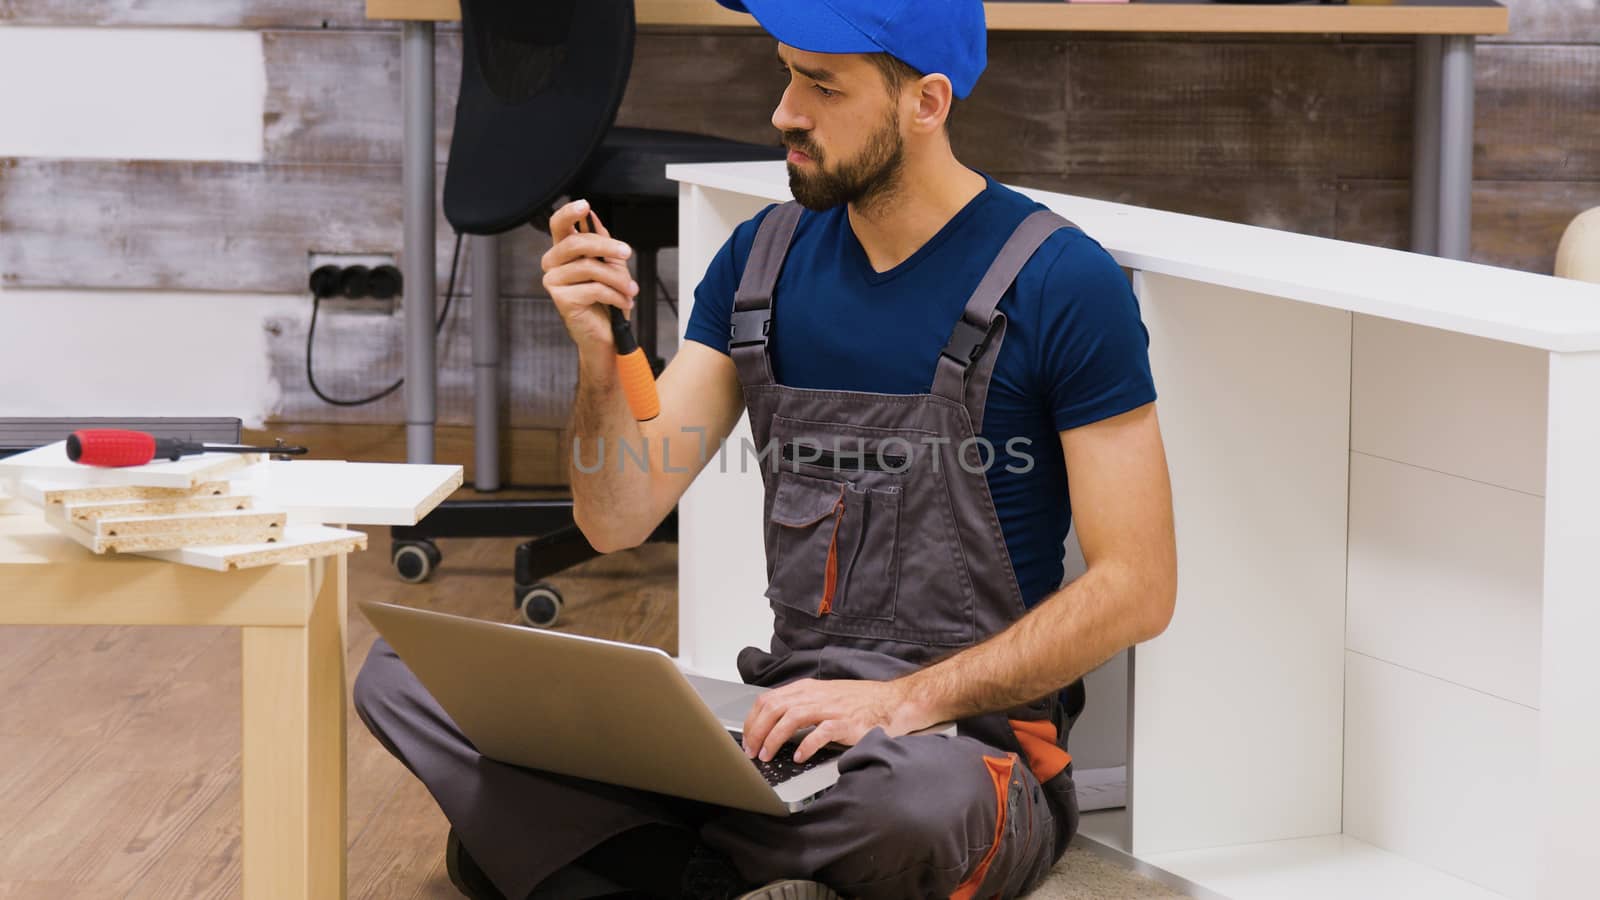 Furniture assembly worker wearing overalls searching instructions using his laptop. Worker holding screwdriver.